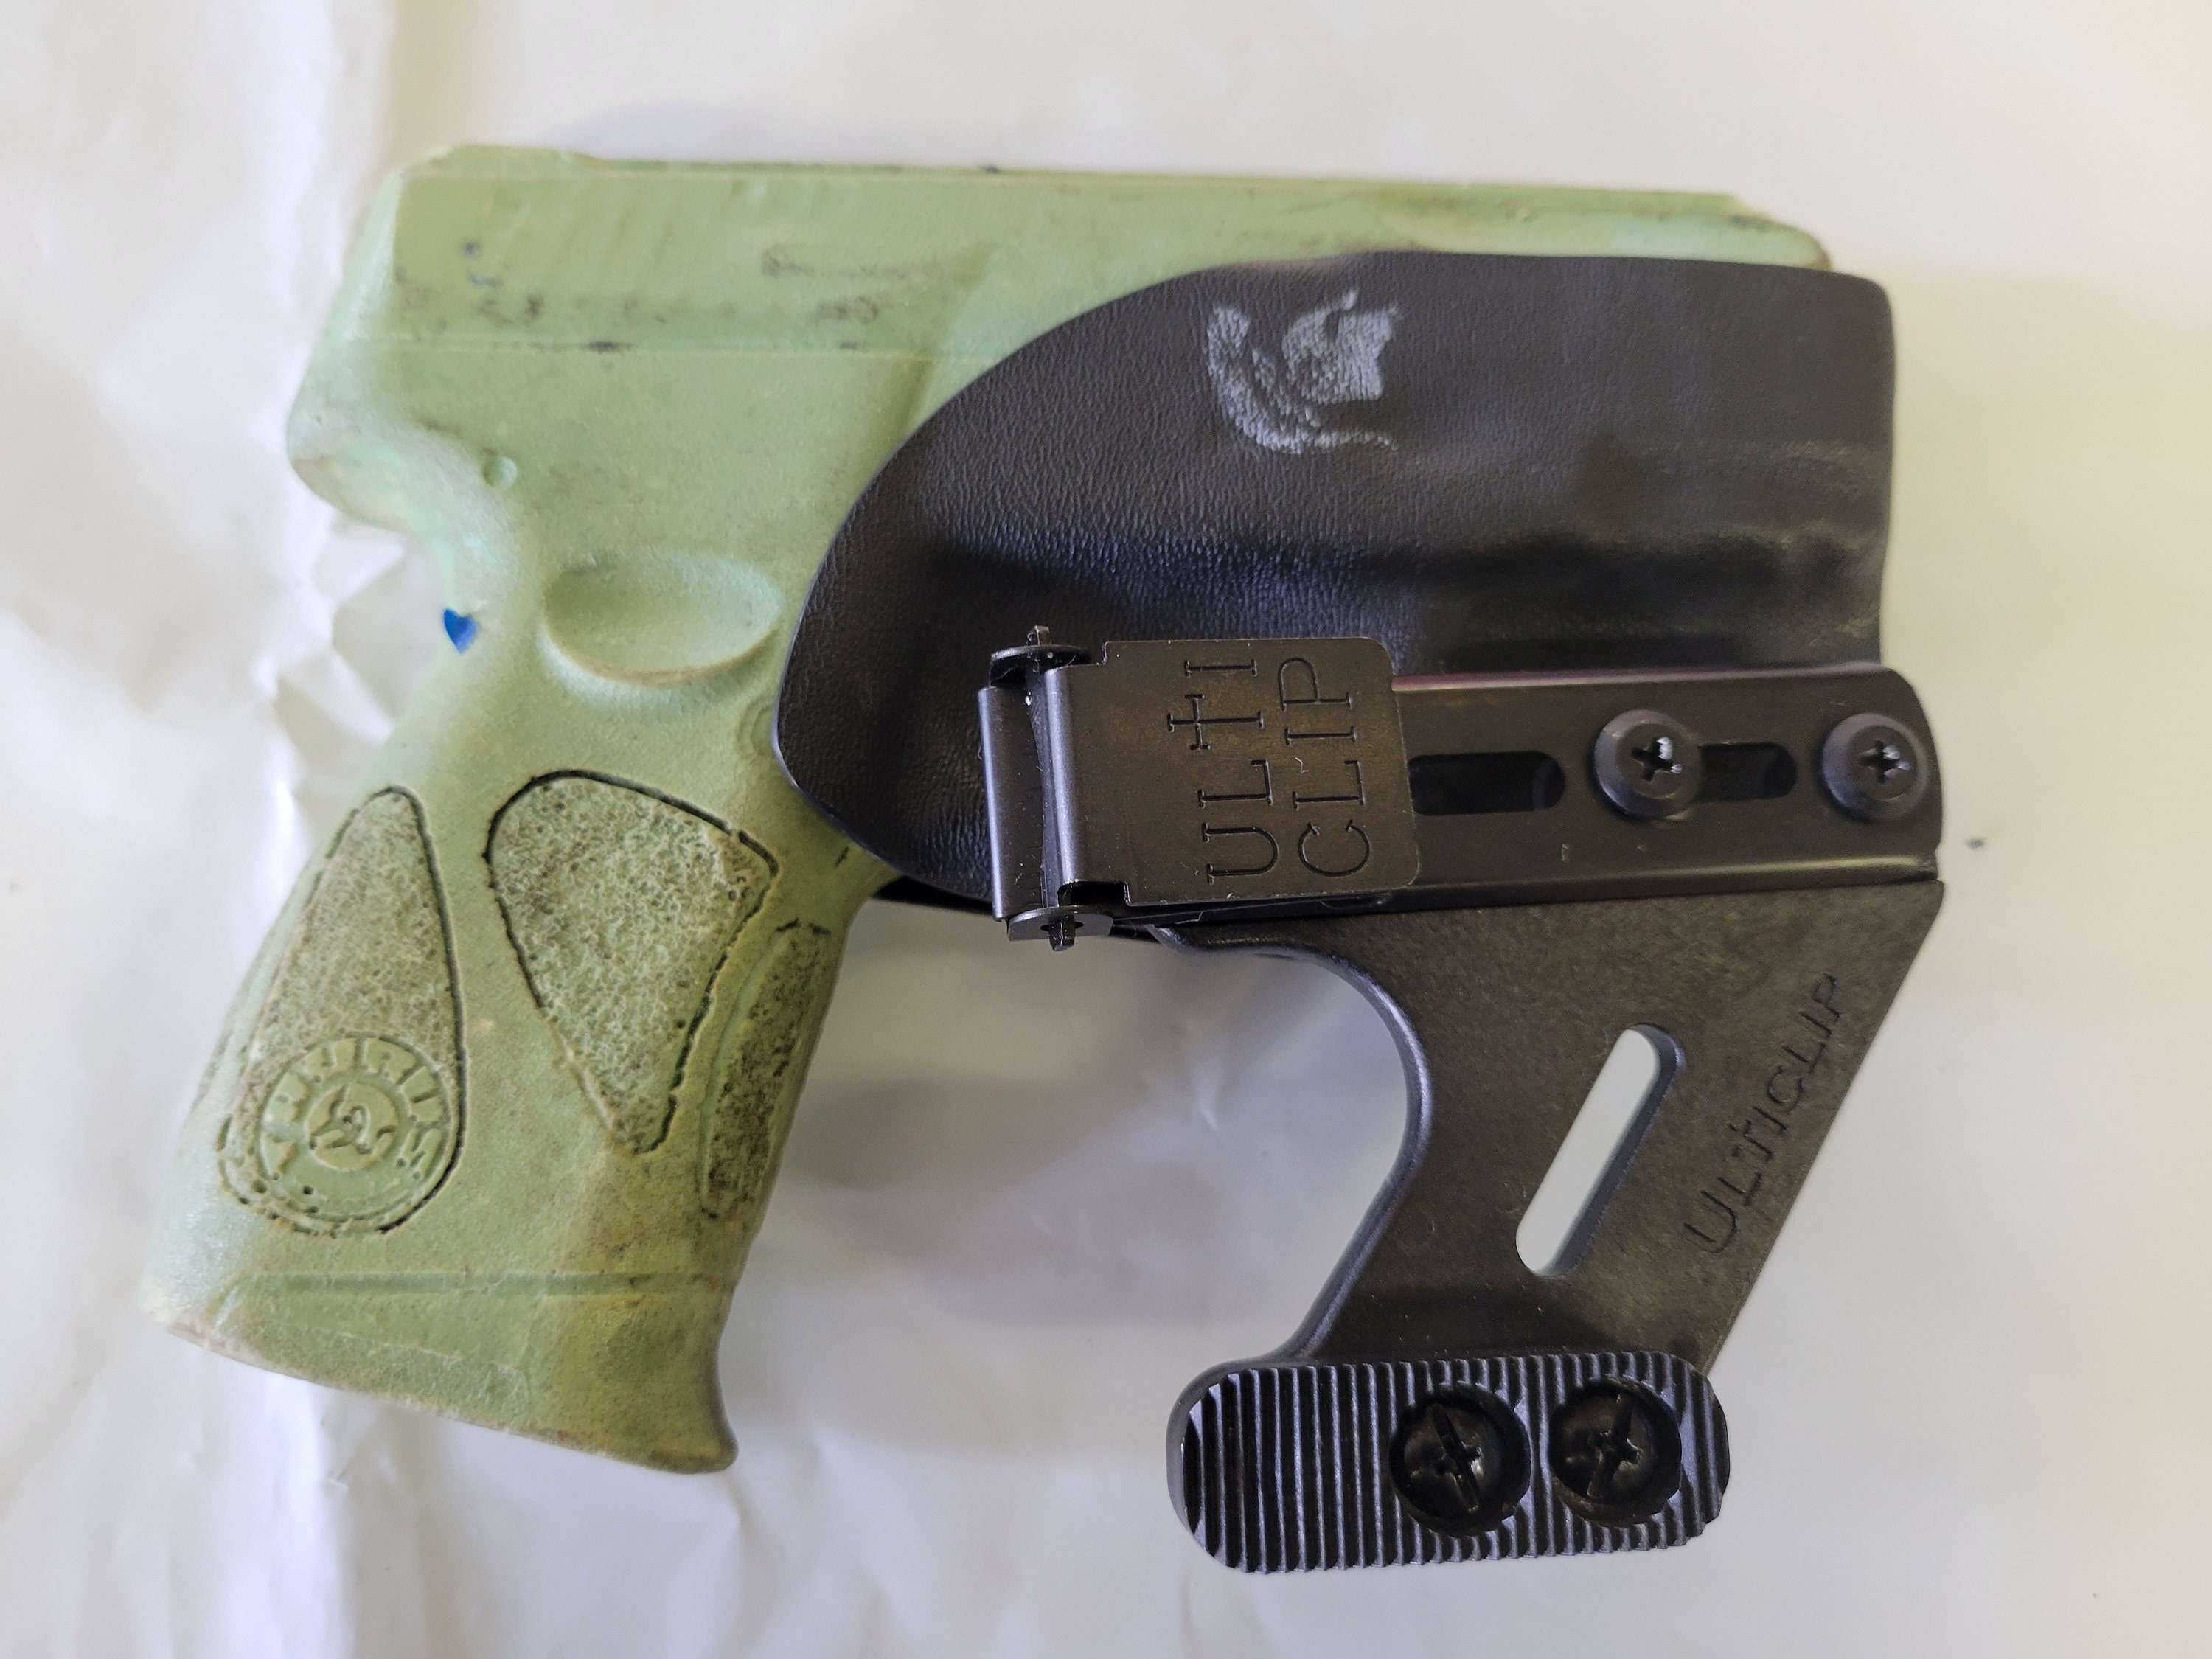 Ulticlip RH Holsters®